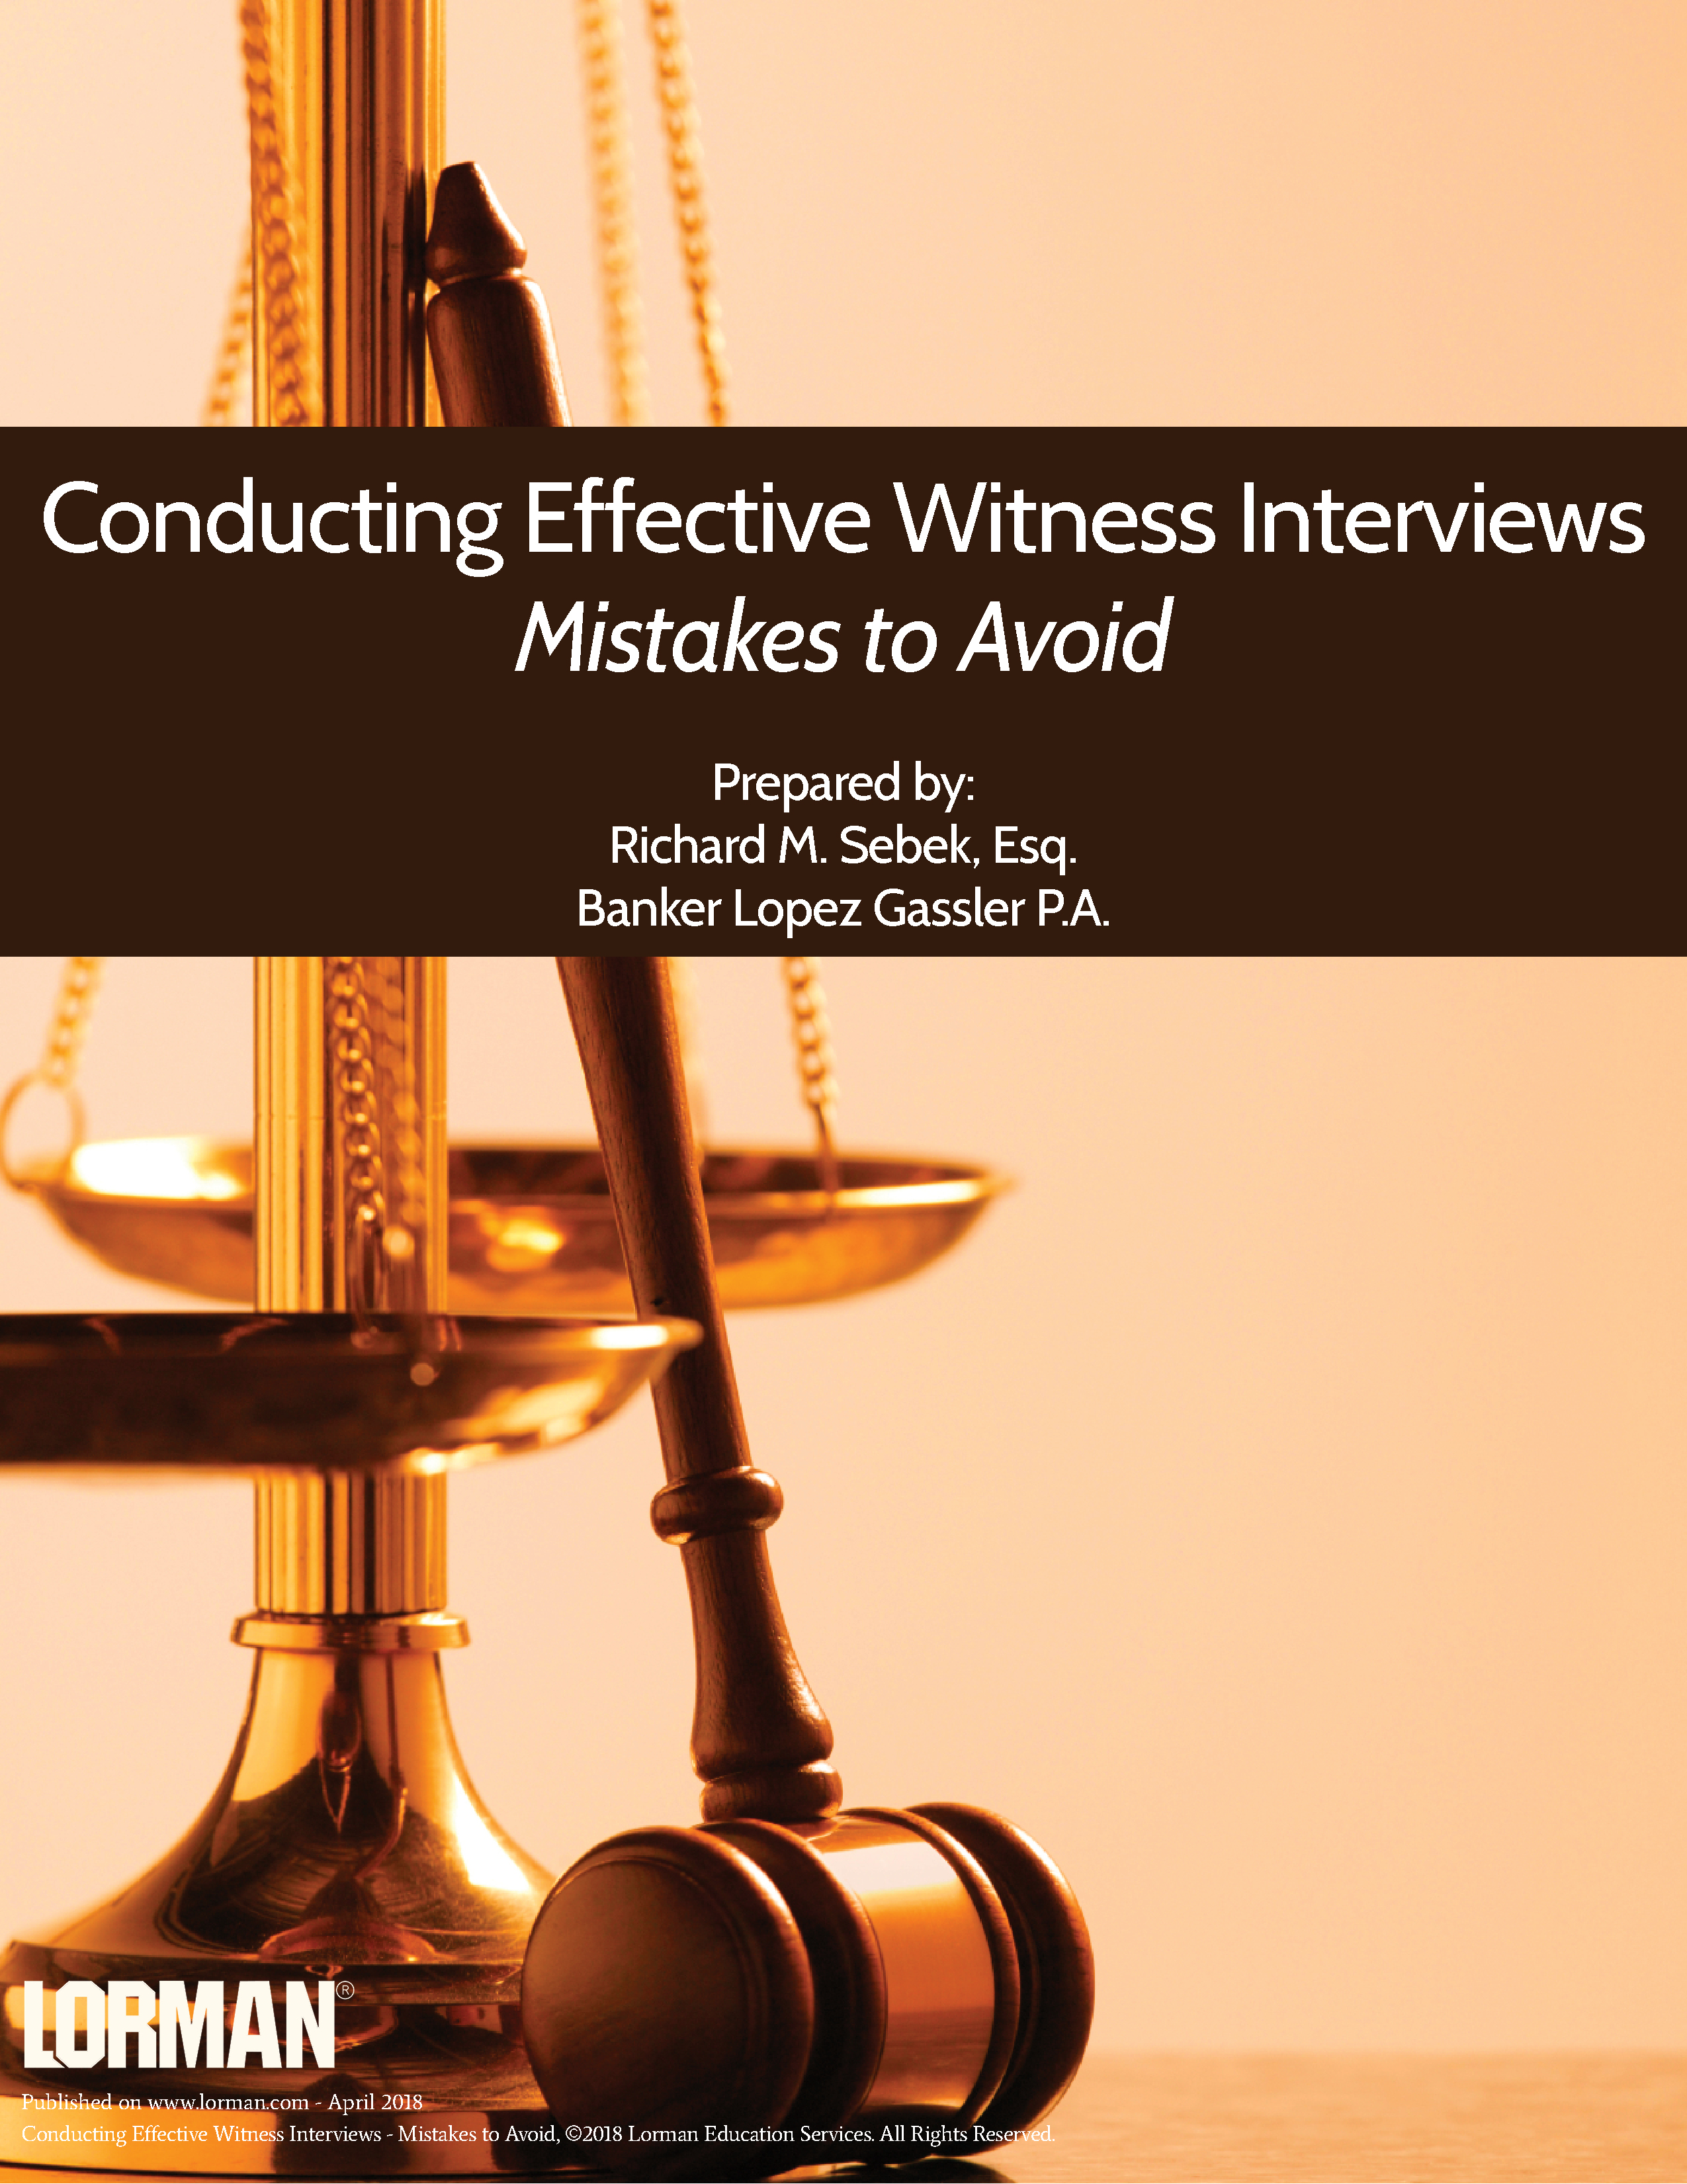 Conducting Effective Witness Interviews - Mistakes to Avoid